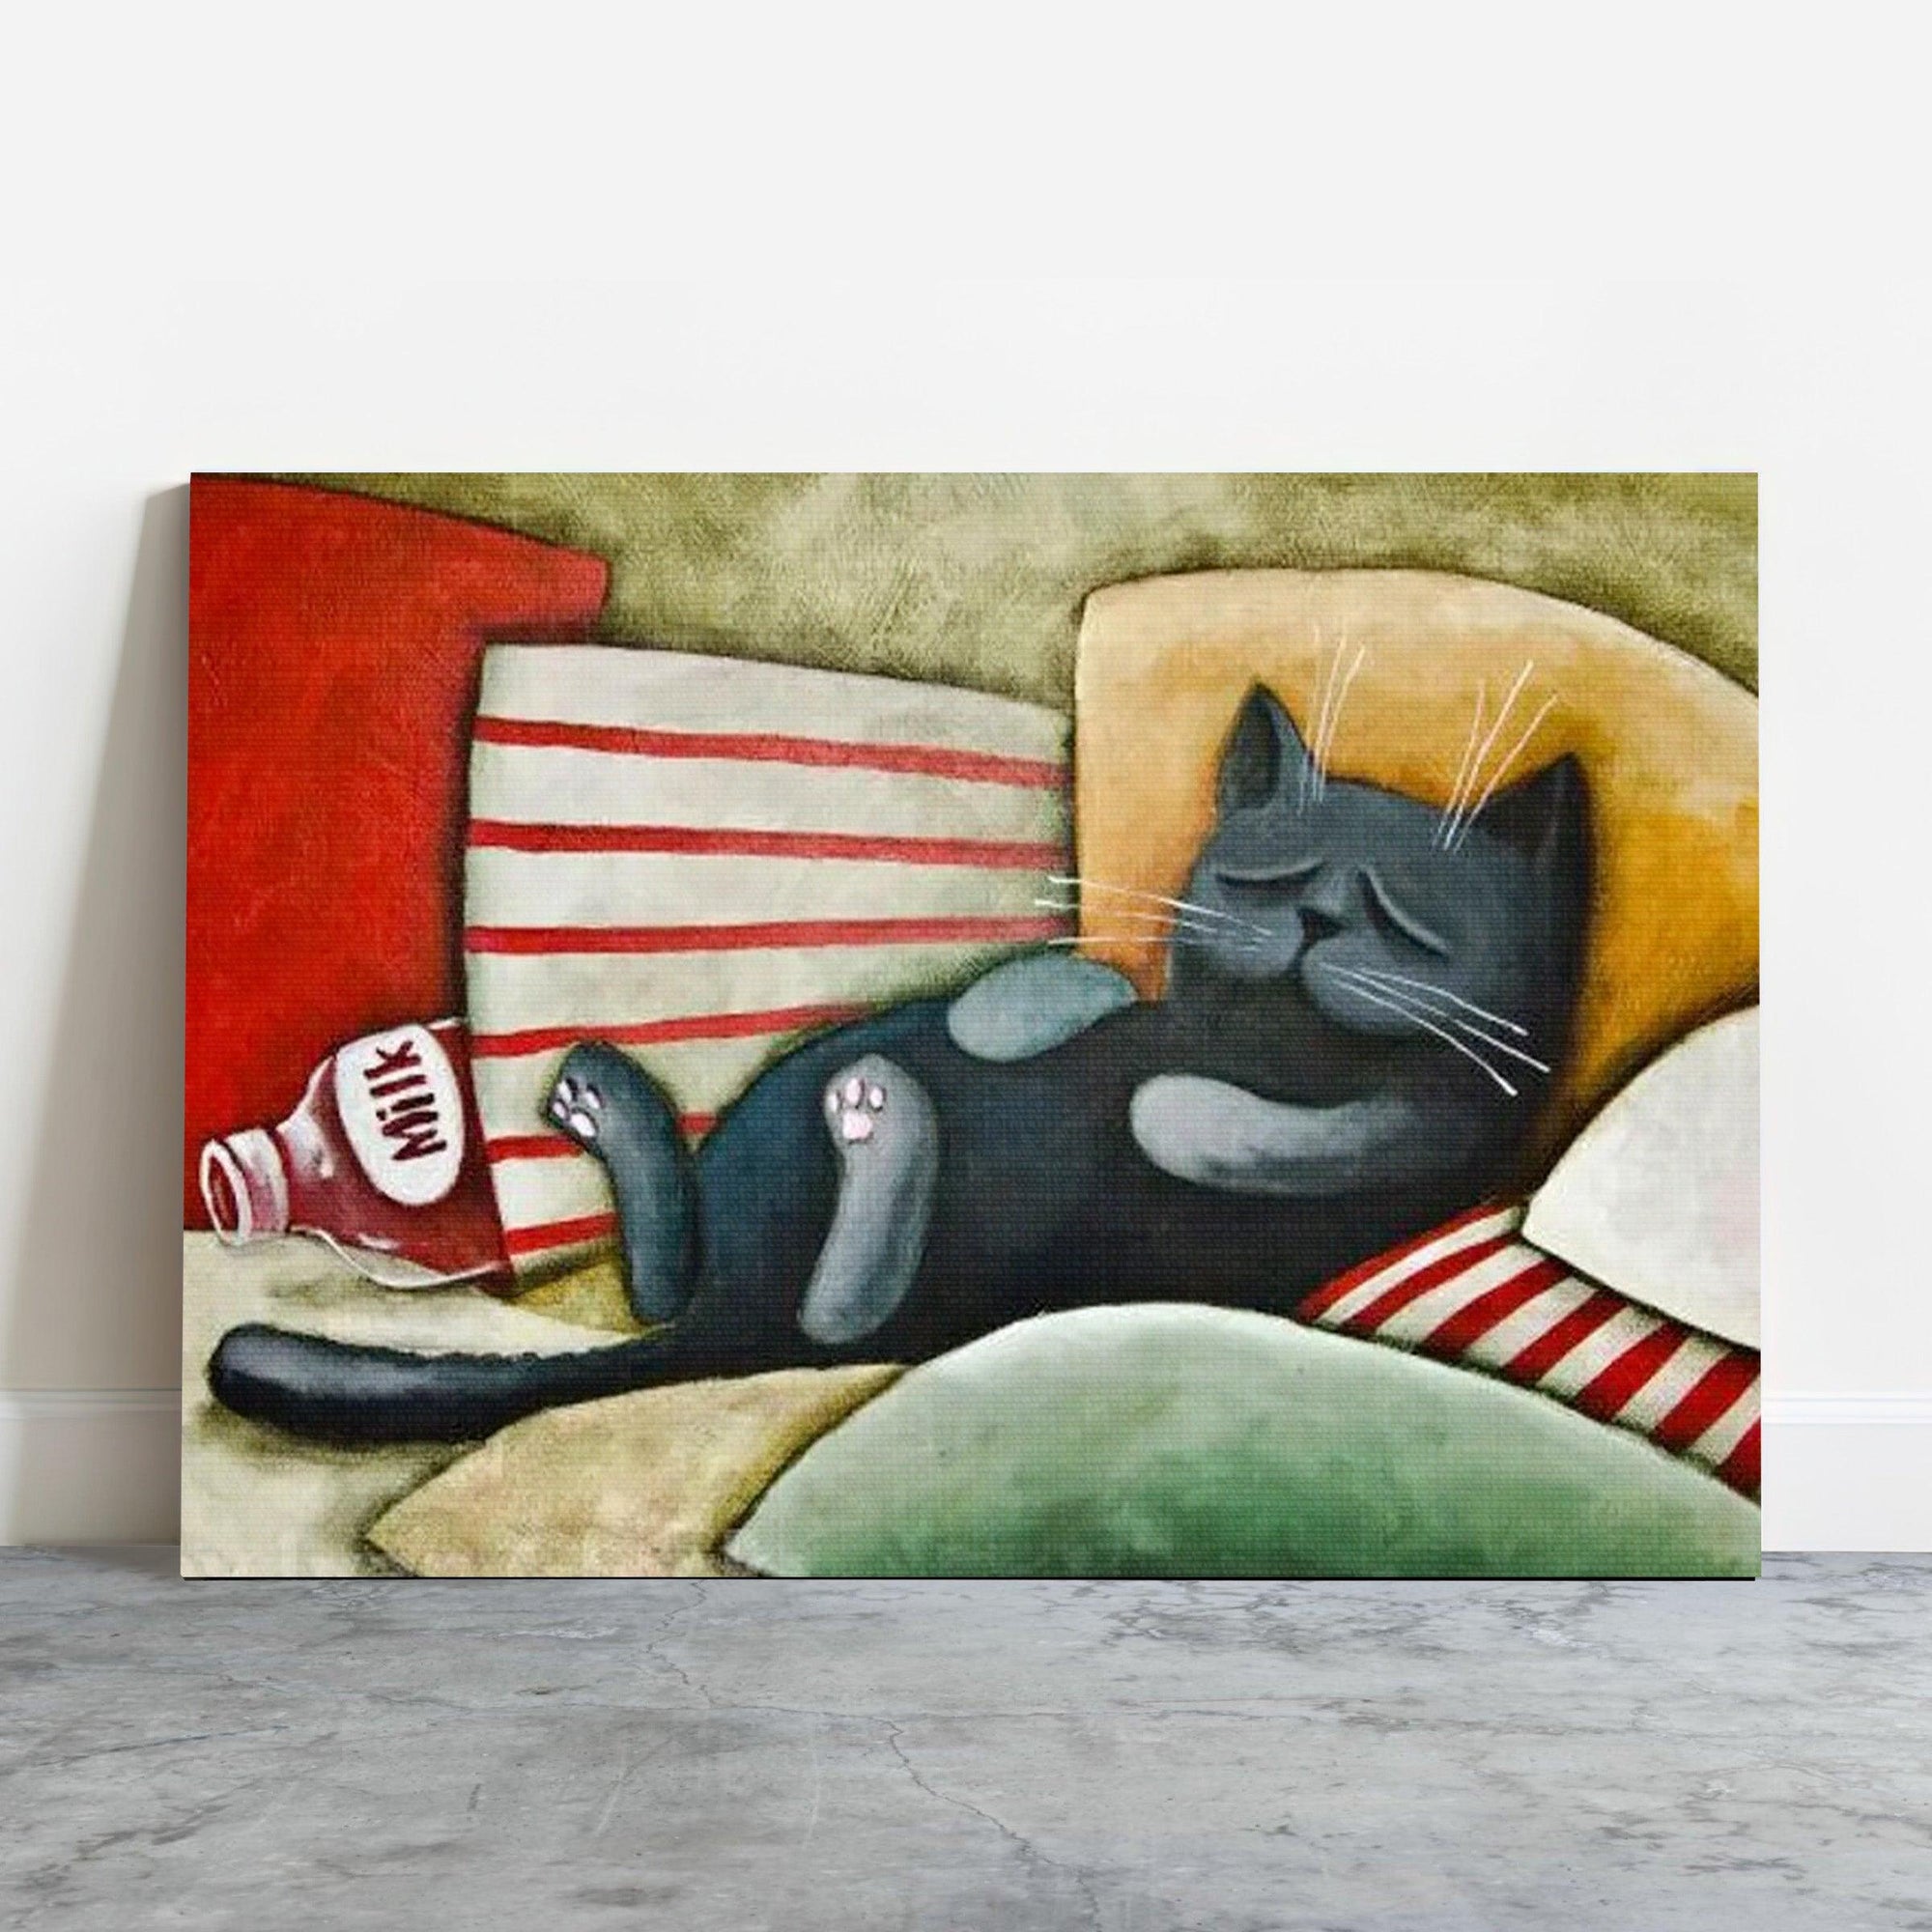 Black Cat Premium Wrapped Landscape Canvas - Sleeping Cat, Black Cat, Funny Cat - Gift For Cat Lovers, Cat Owners - Amzanimalsgift